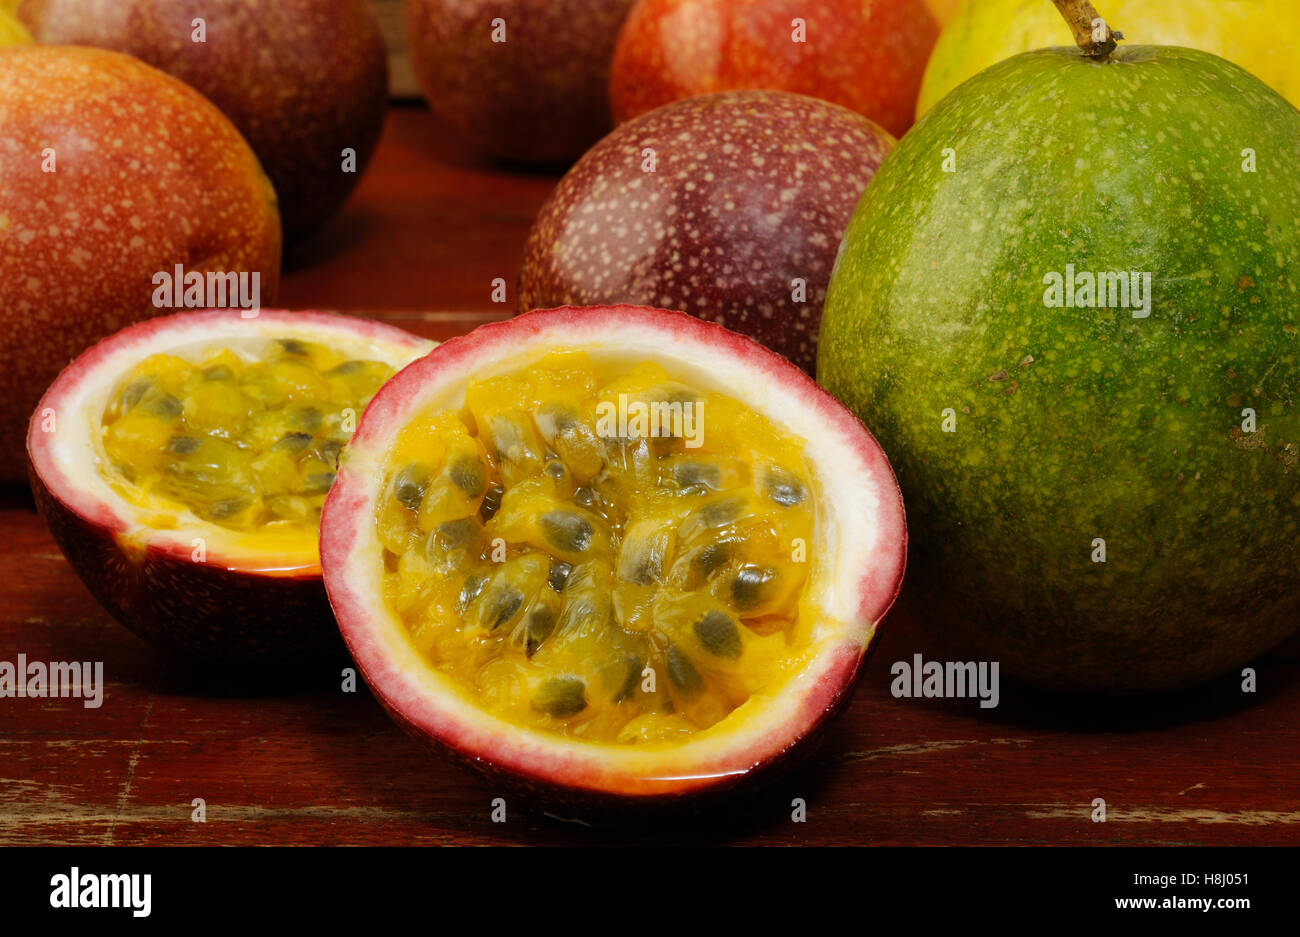 Passion fruits on wooden background Stock Photo